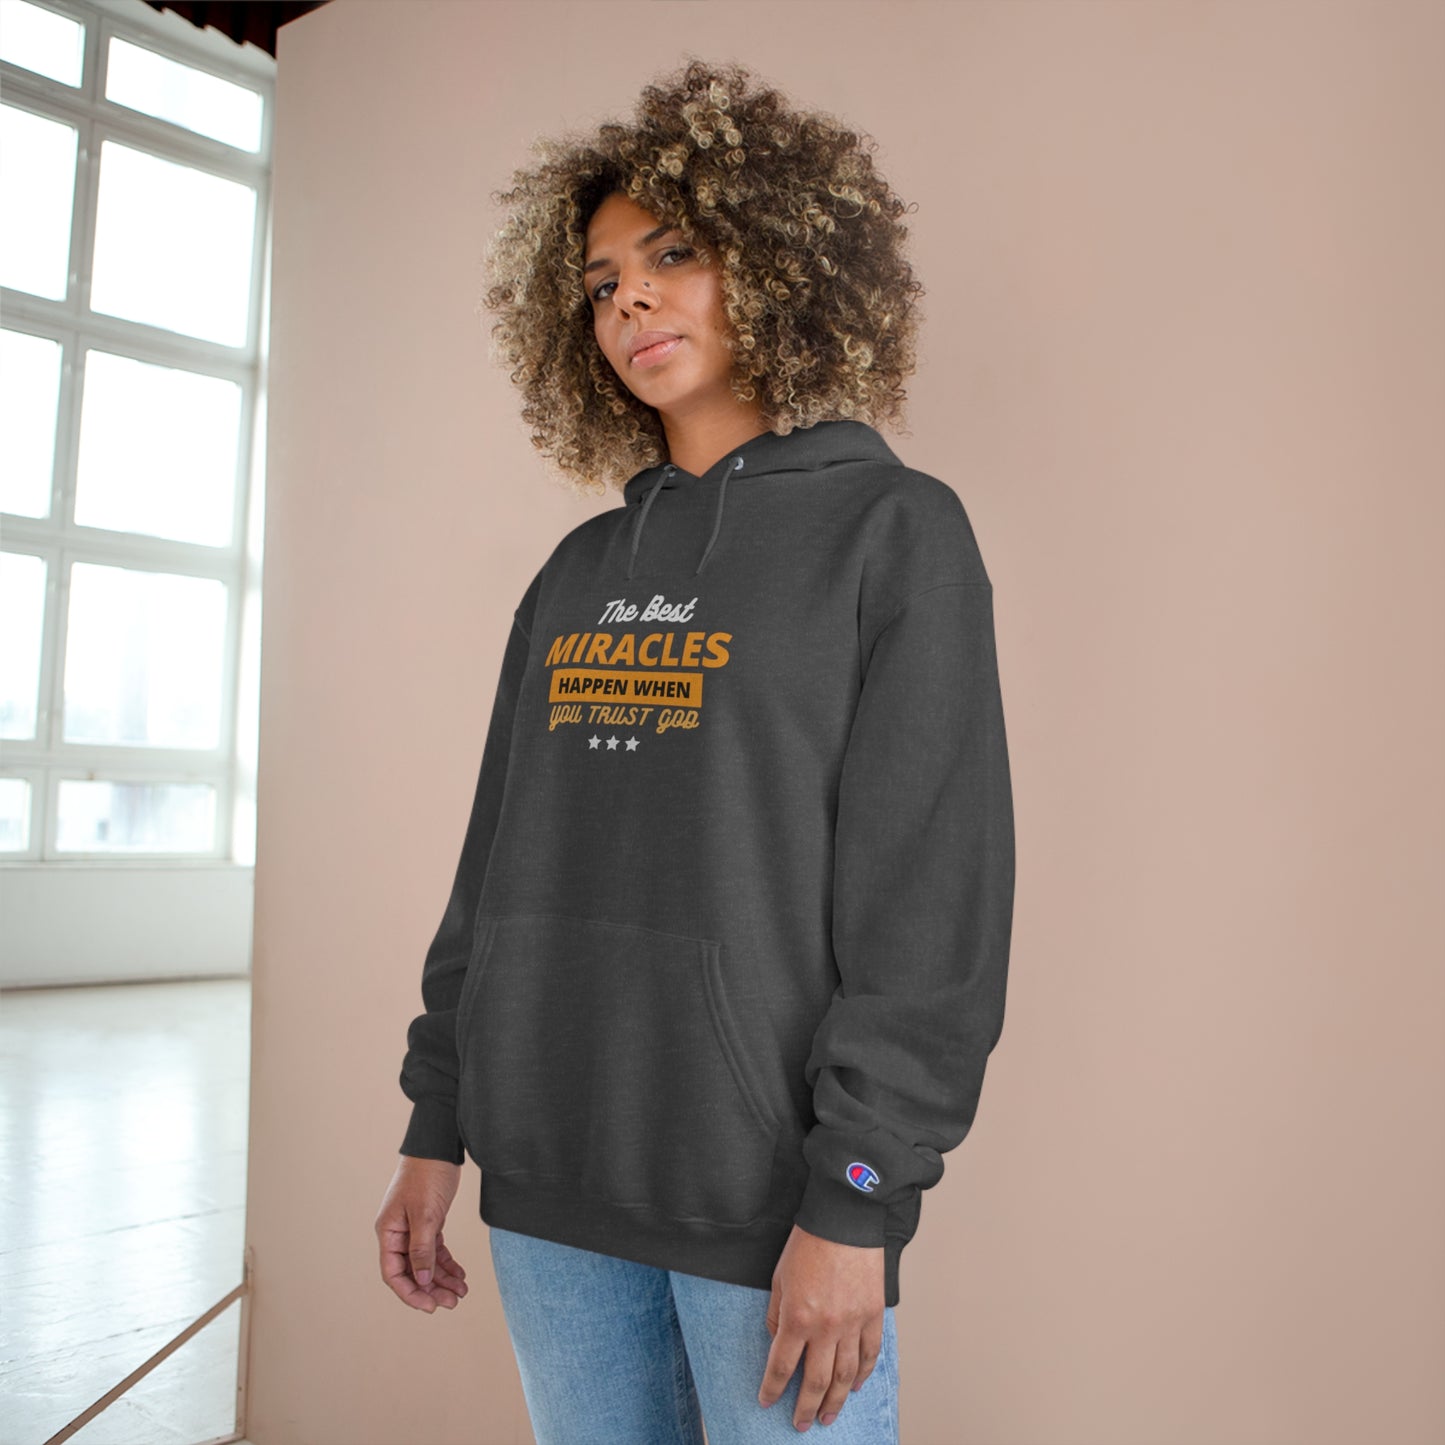 The Best Miracles Happen When You Trust God Christian Unisex Champion Hoodie Printify